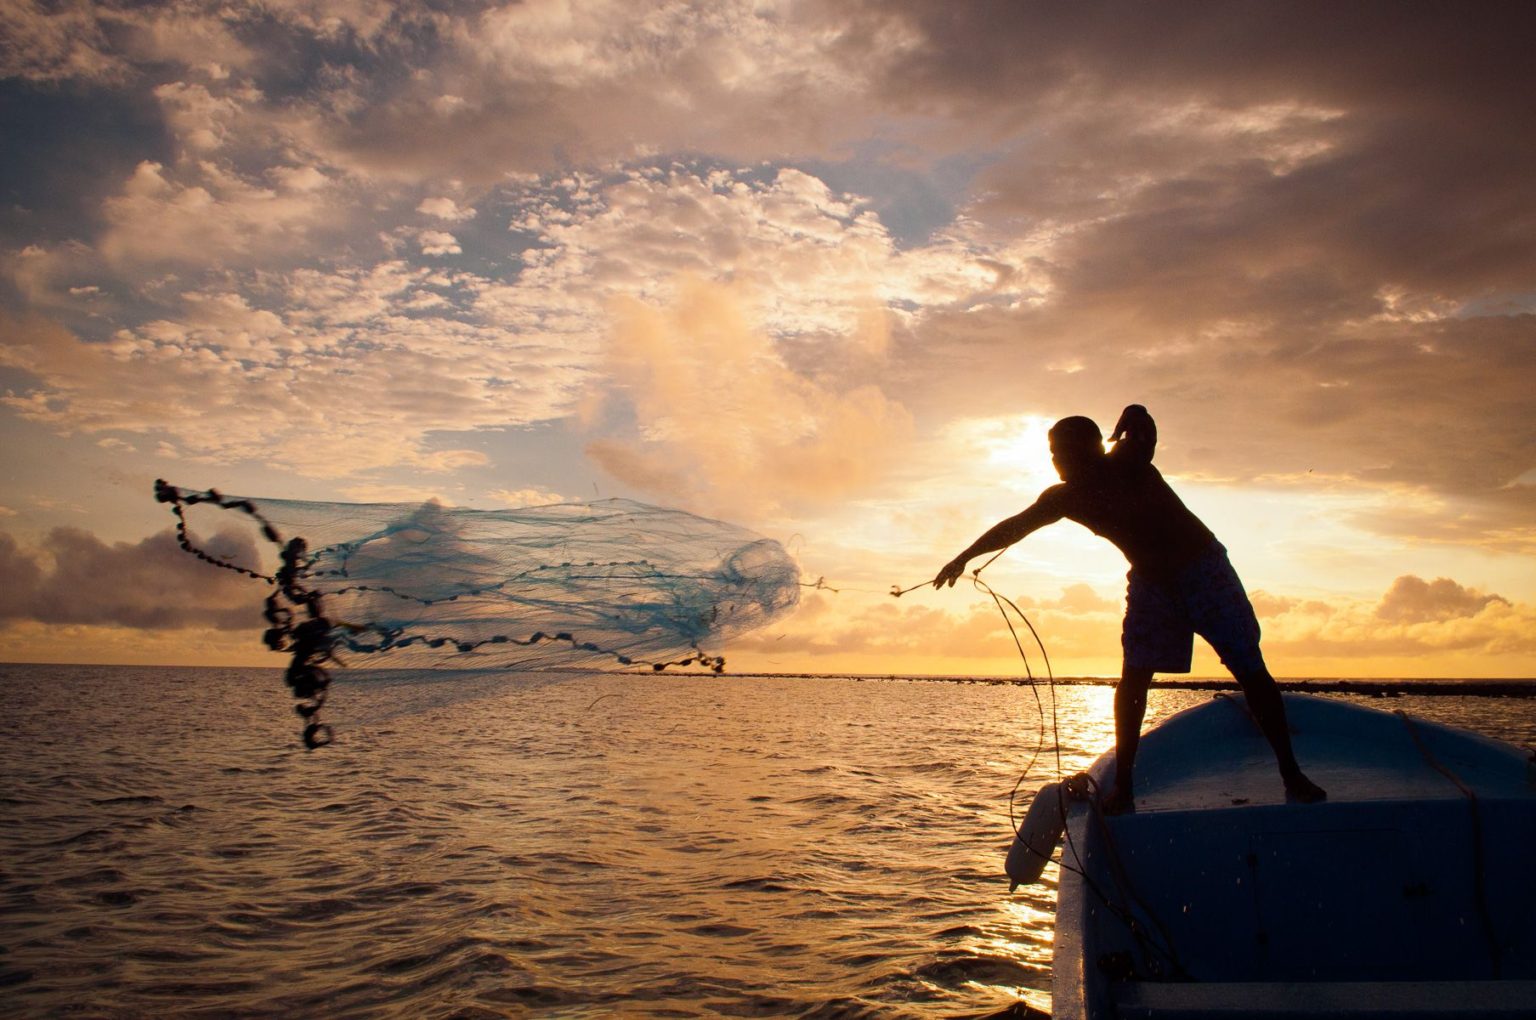 Fisherman casts net at dawn in Belize